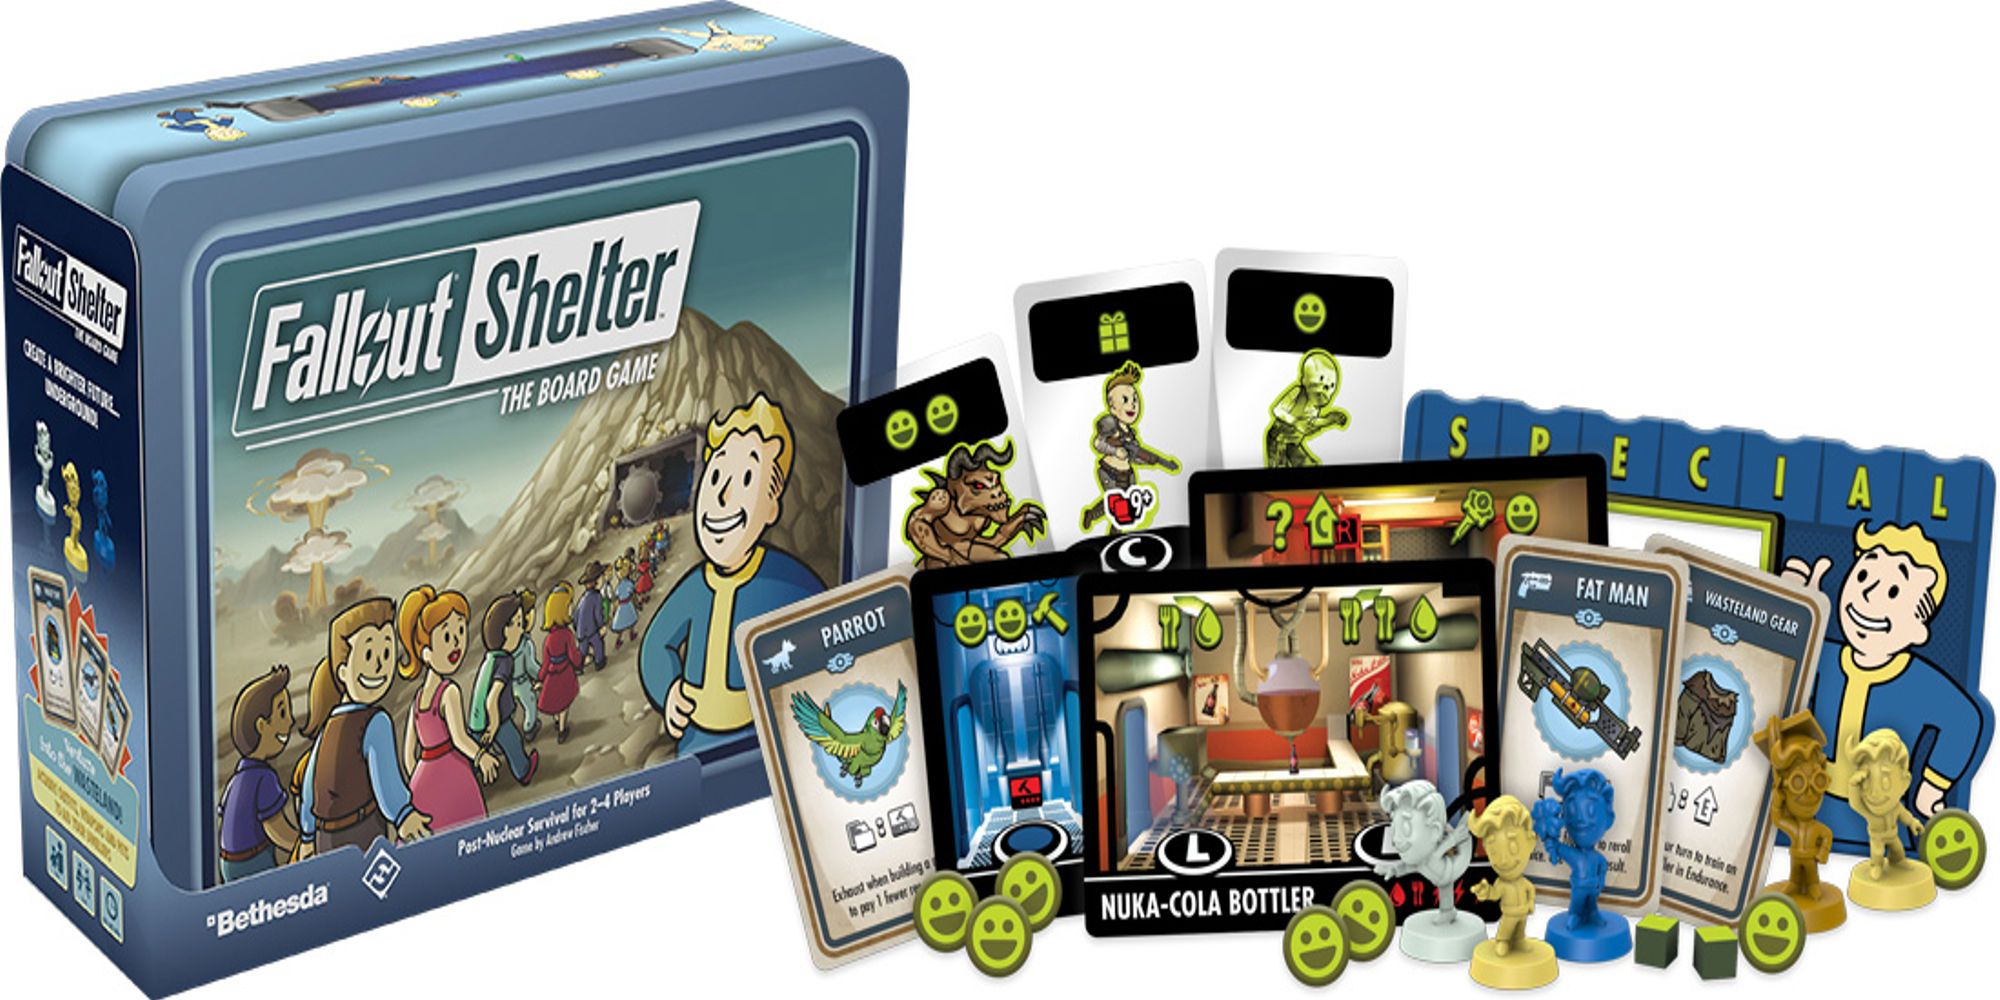 The Fallout board game box and some cards displayed next to it